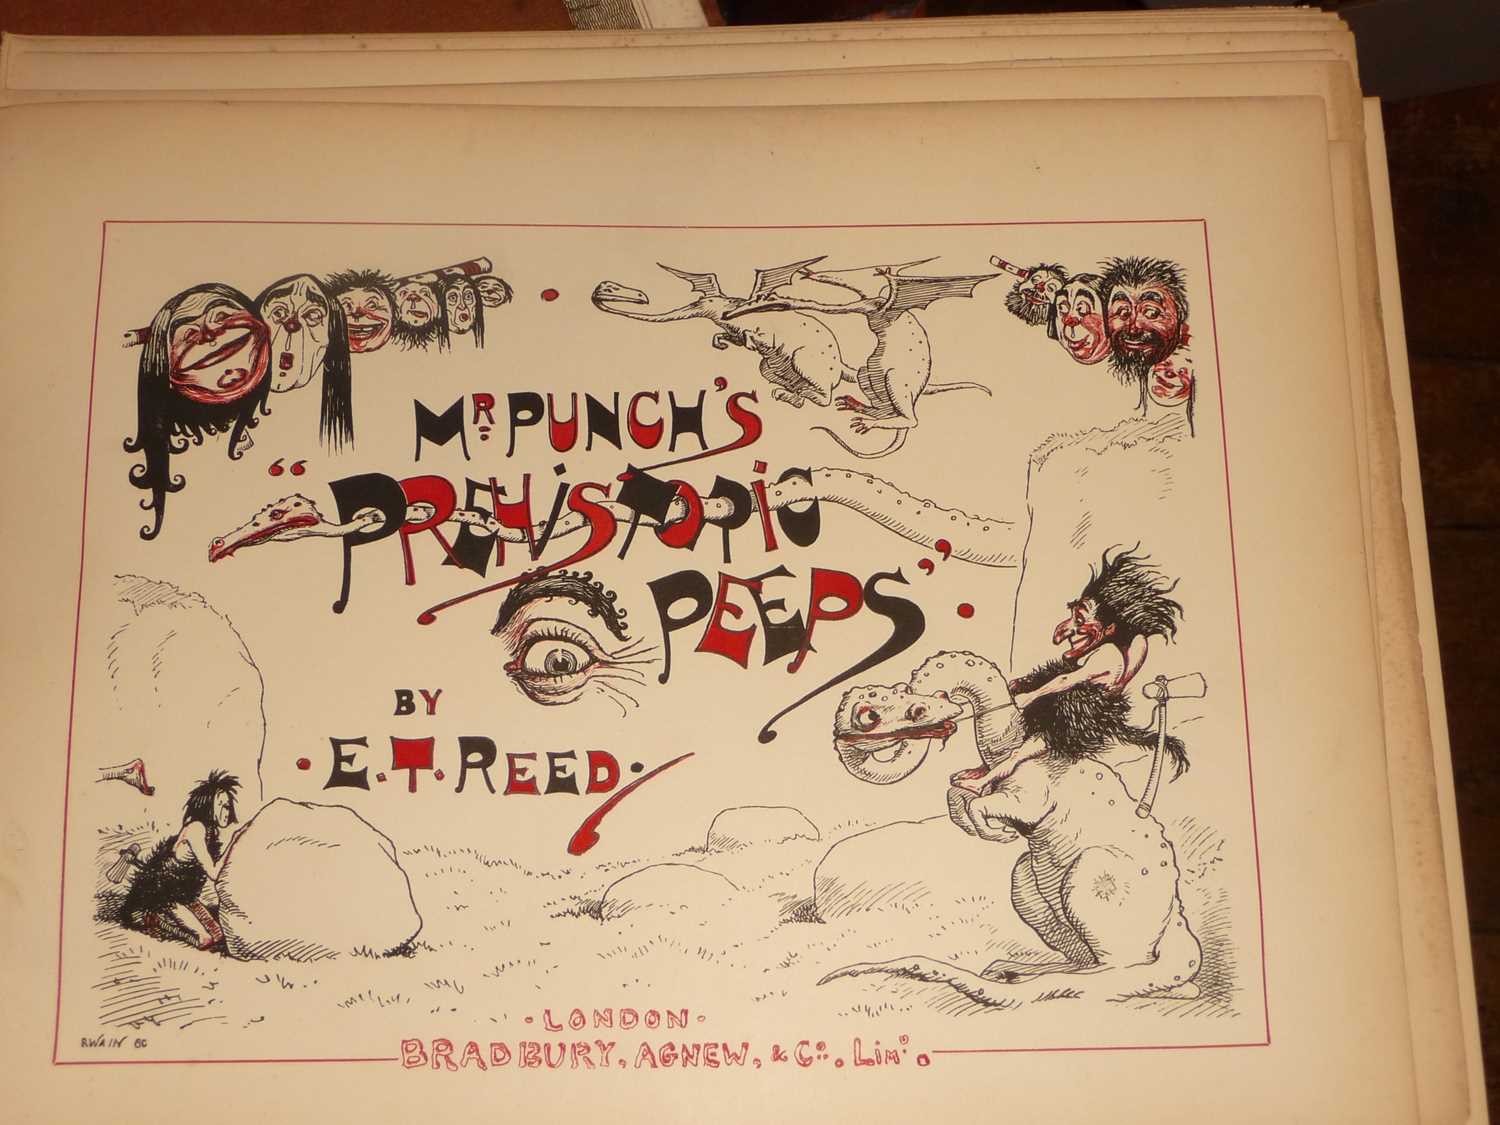 Skelton's Etchings of the Antiquities of Bristol and 19th c. Mr. Punch's Prehistoric Peeps books, - Image 3 of 6